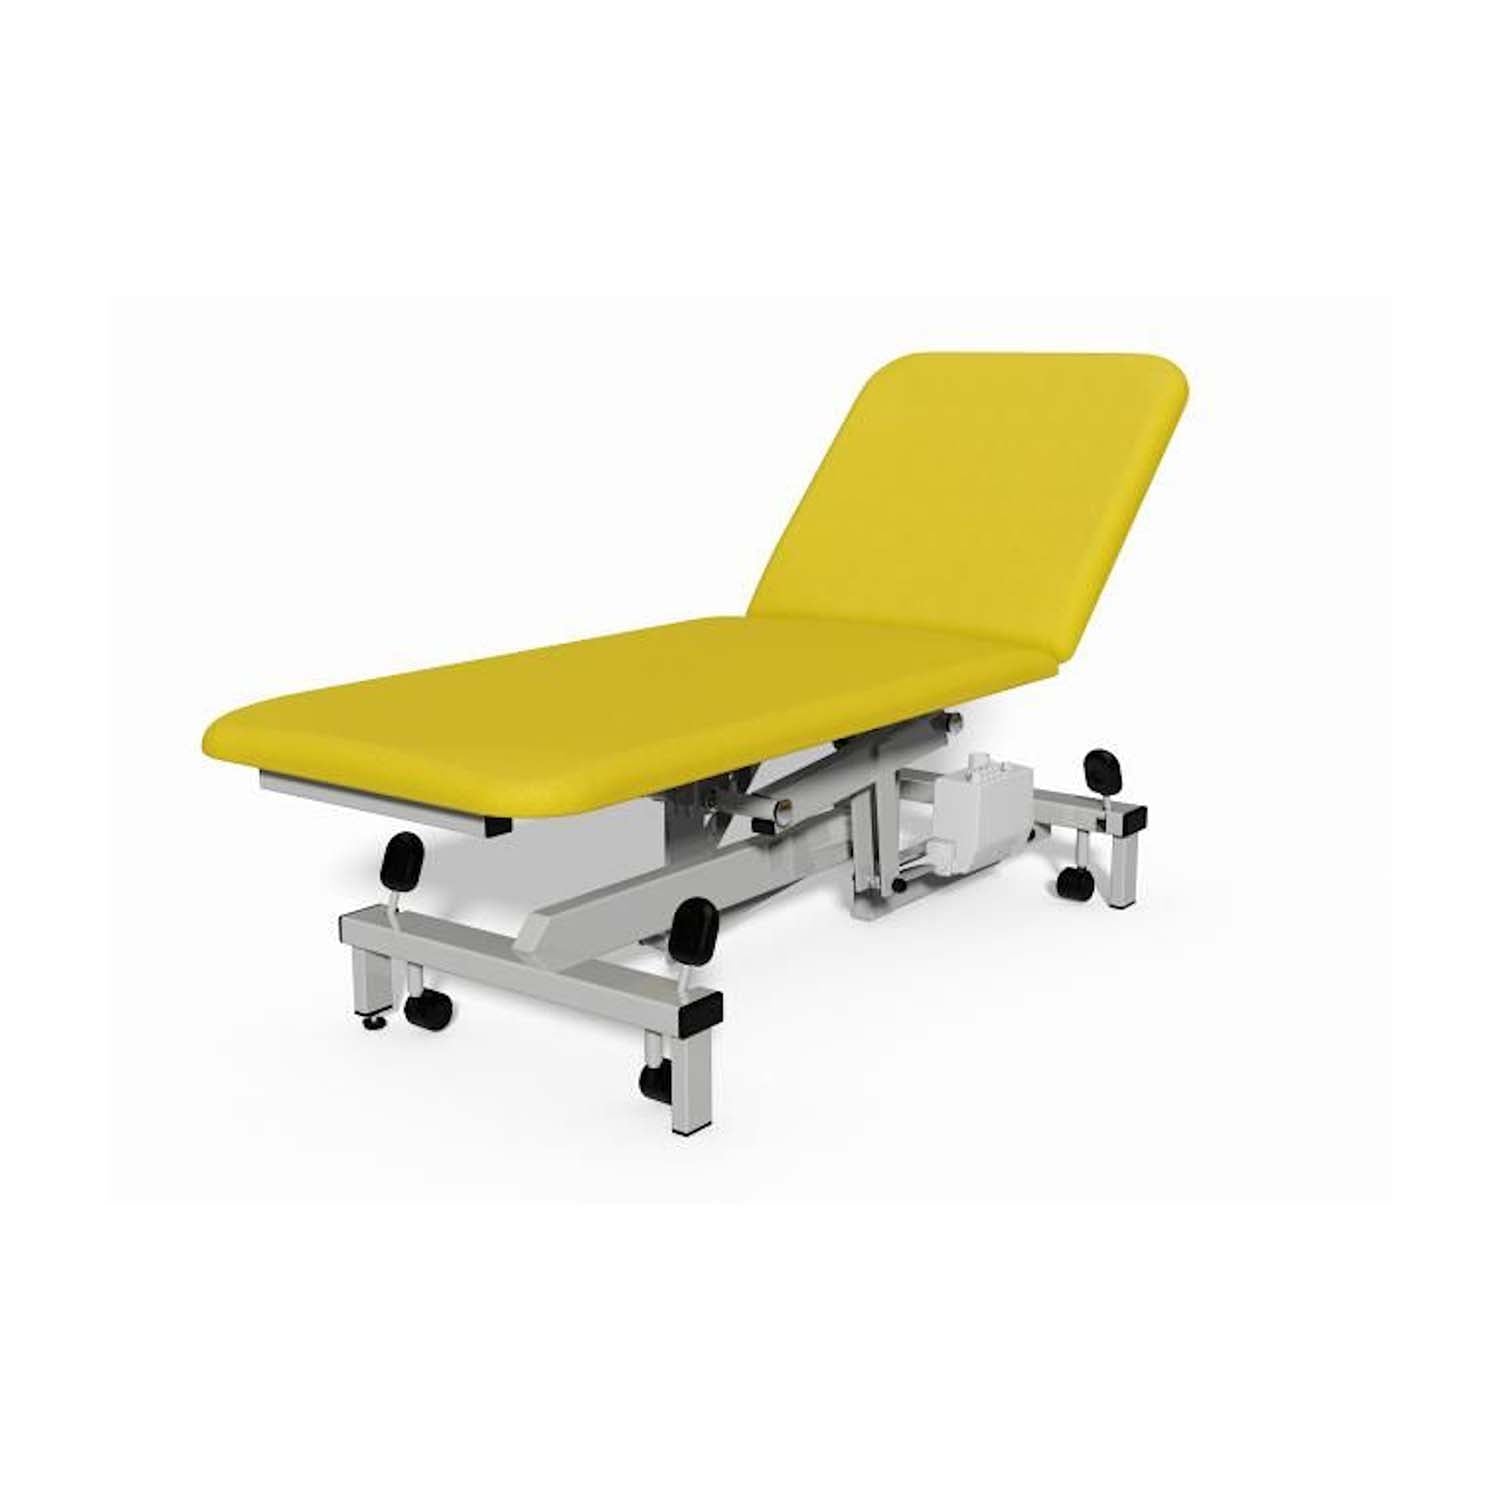 Plinth 2000 Model 502 Examination Couch | Electric | Marigold